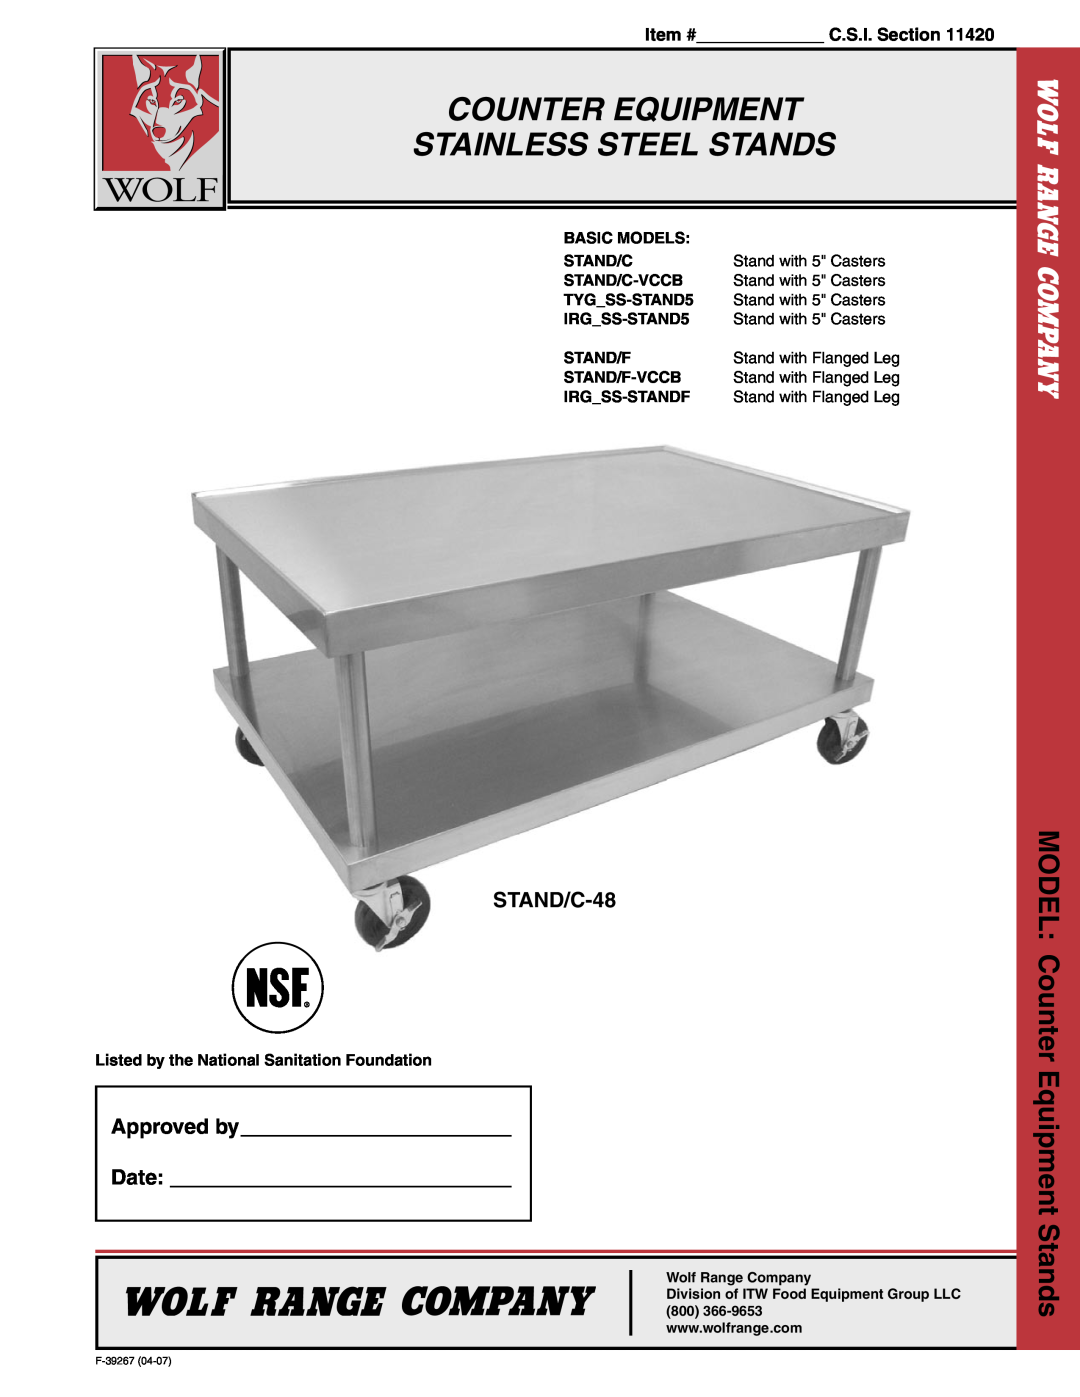 Wolf STAND/C-48 manual Counter Equipment Stainless Steel Stands, MODEL Counter Equipment Stands, Stand/C-48, Approved by 